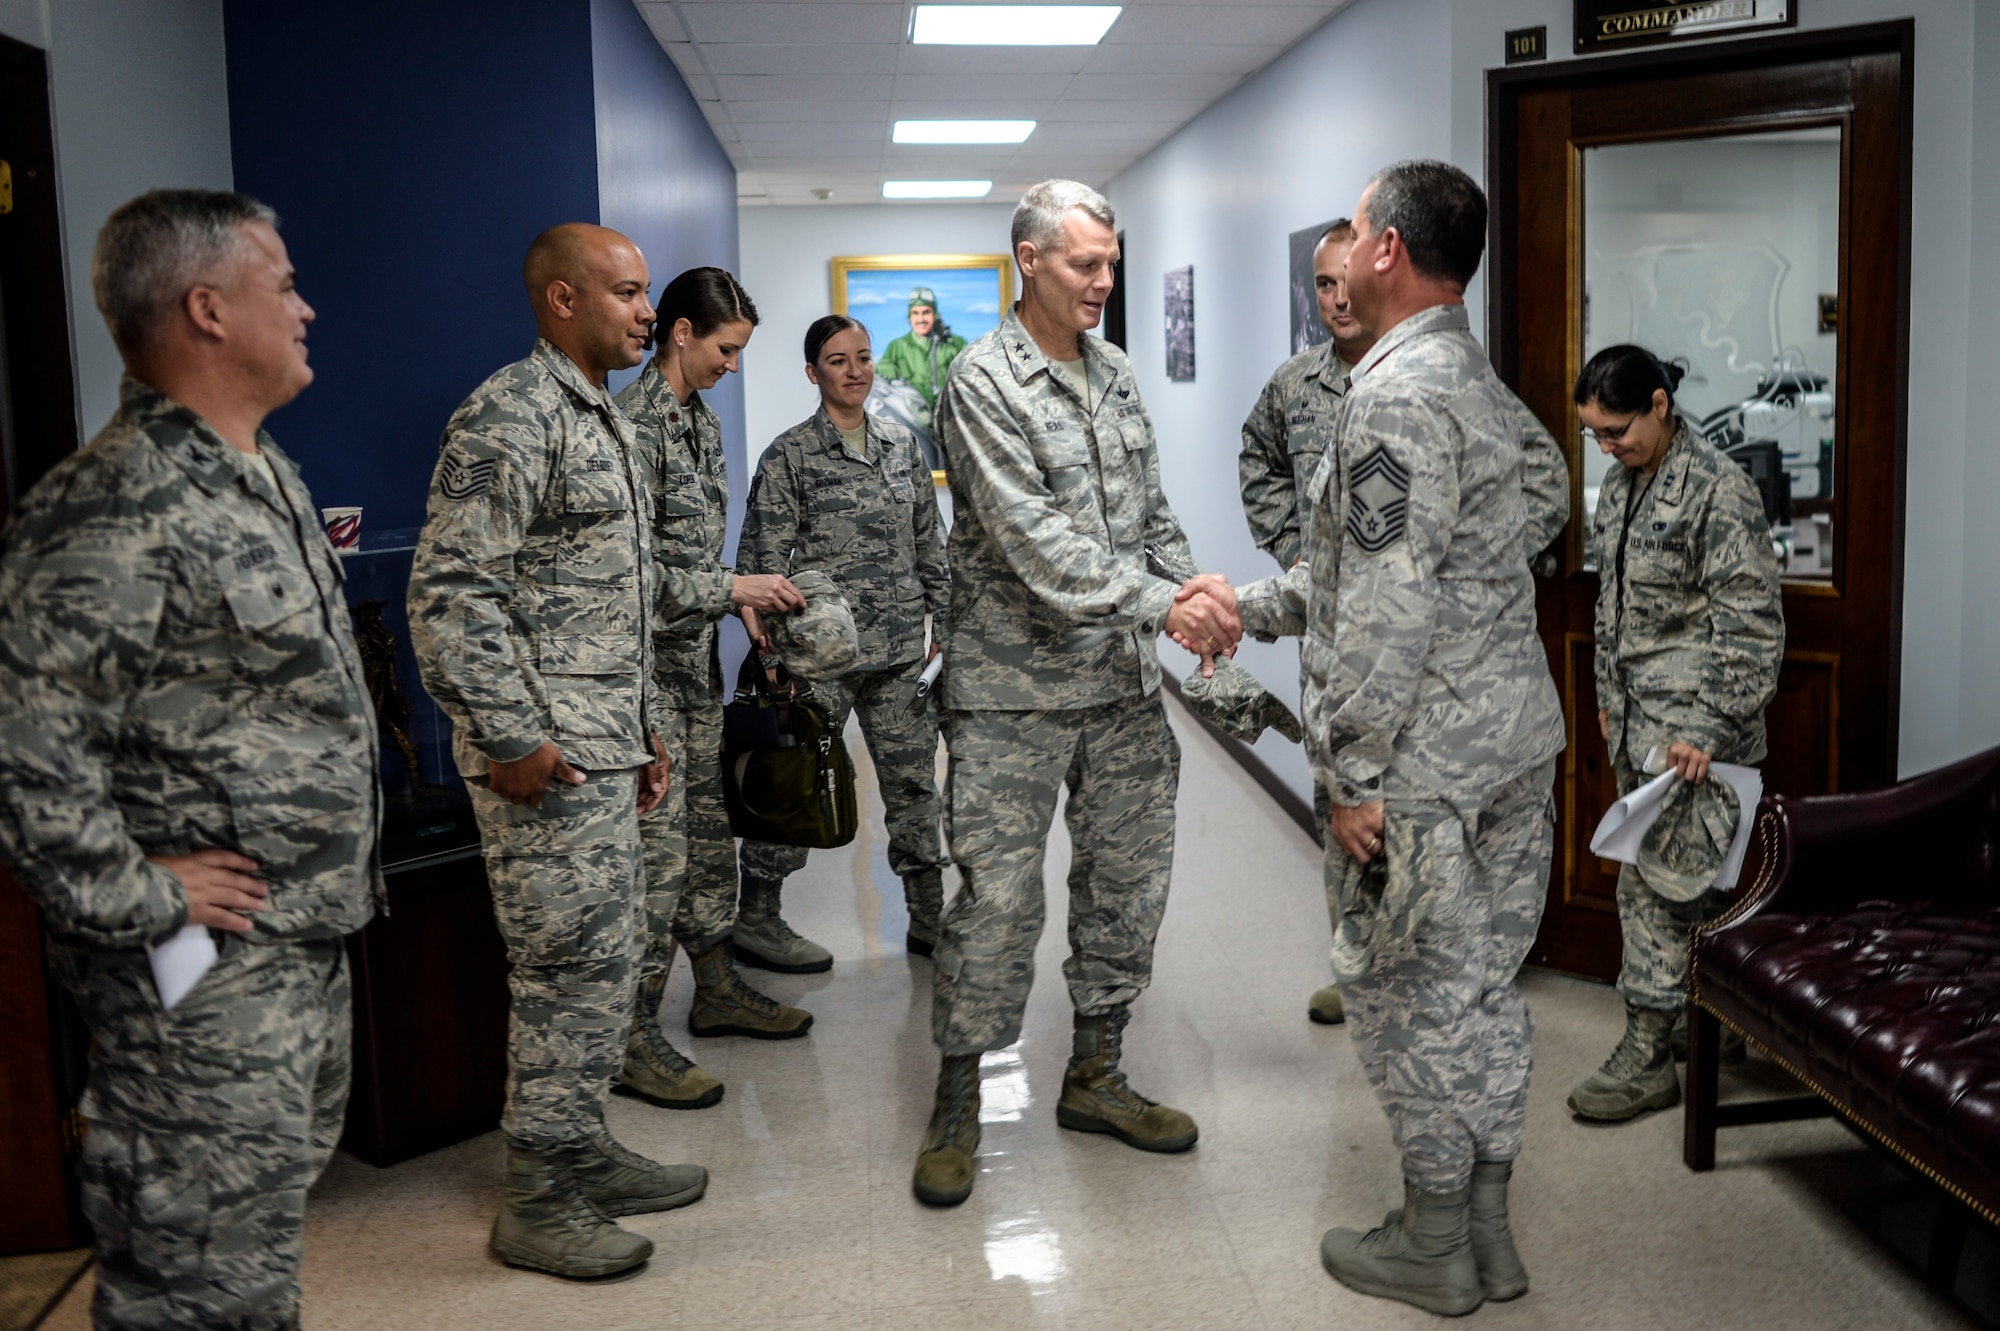 U.S. Air Force Acting Director, Air National Guard, Maj. Gen. Brian G. Neal, greets airmen of the Puerto Rico Air National Guard during his April 9 visit to the 156th Airlift Wing, Muñiz Air National Guard Base, Carolina, Puerto Rico. Neal attended briefings and toured facilities at the 156th AW and the 141st Air Control Squadron, Punta Borinquen Radar Site, Aguadilla, Puerto Rico. (U.S. Air  National Guard photo by Staff Sgt. Christian Jadot